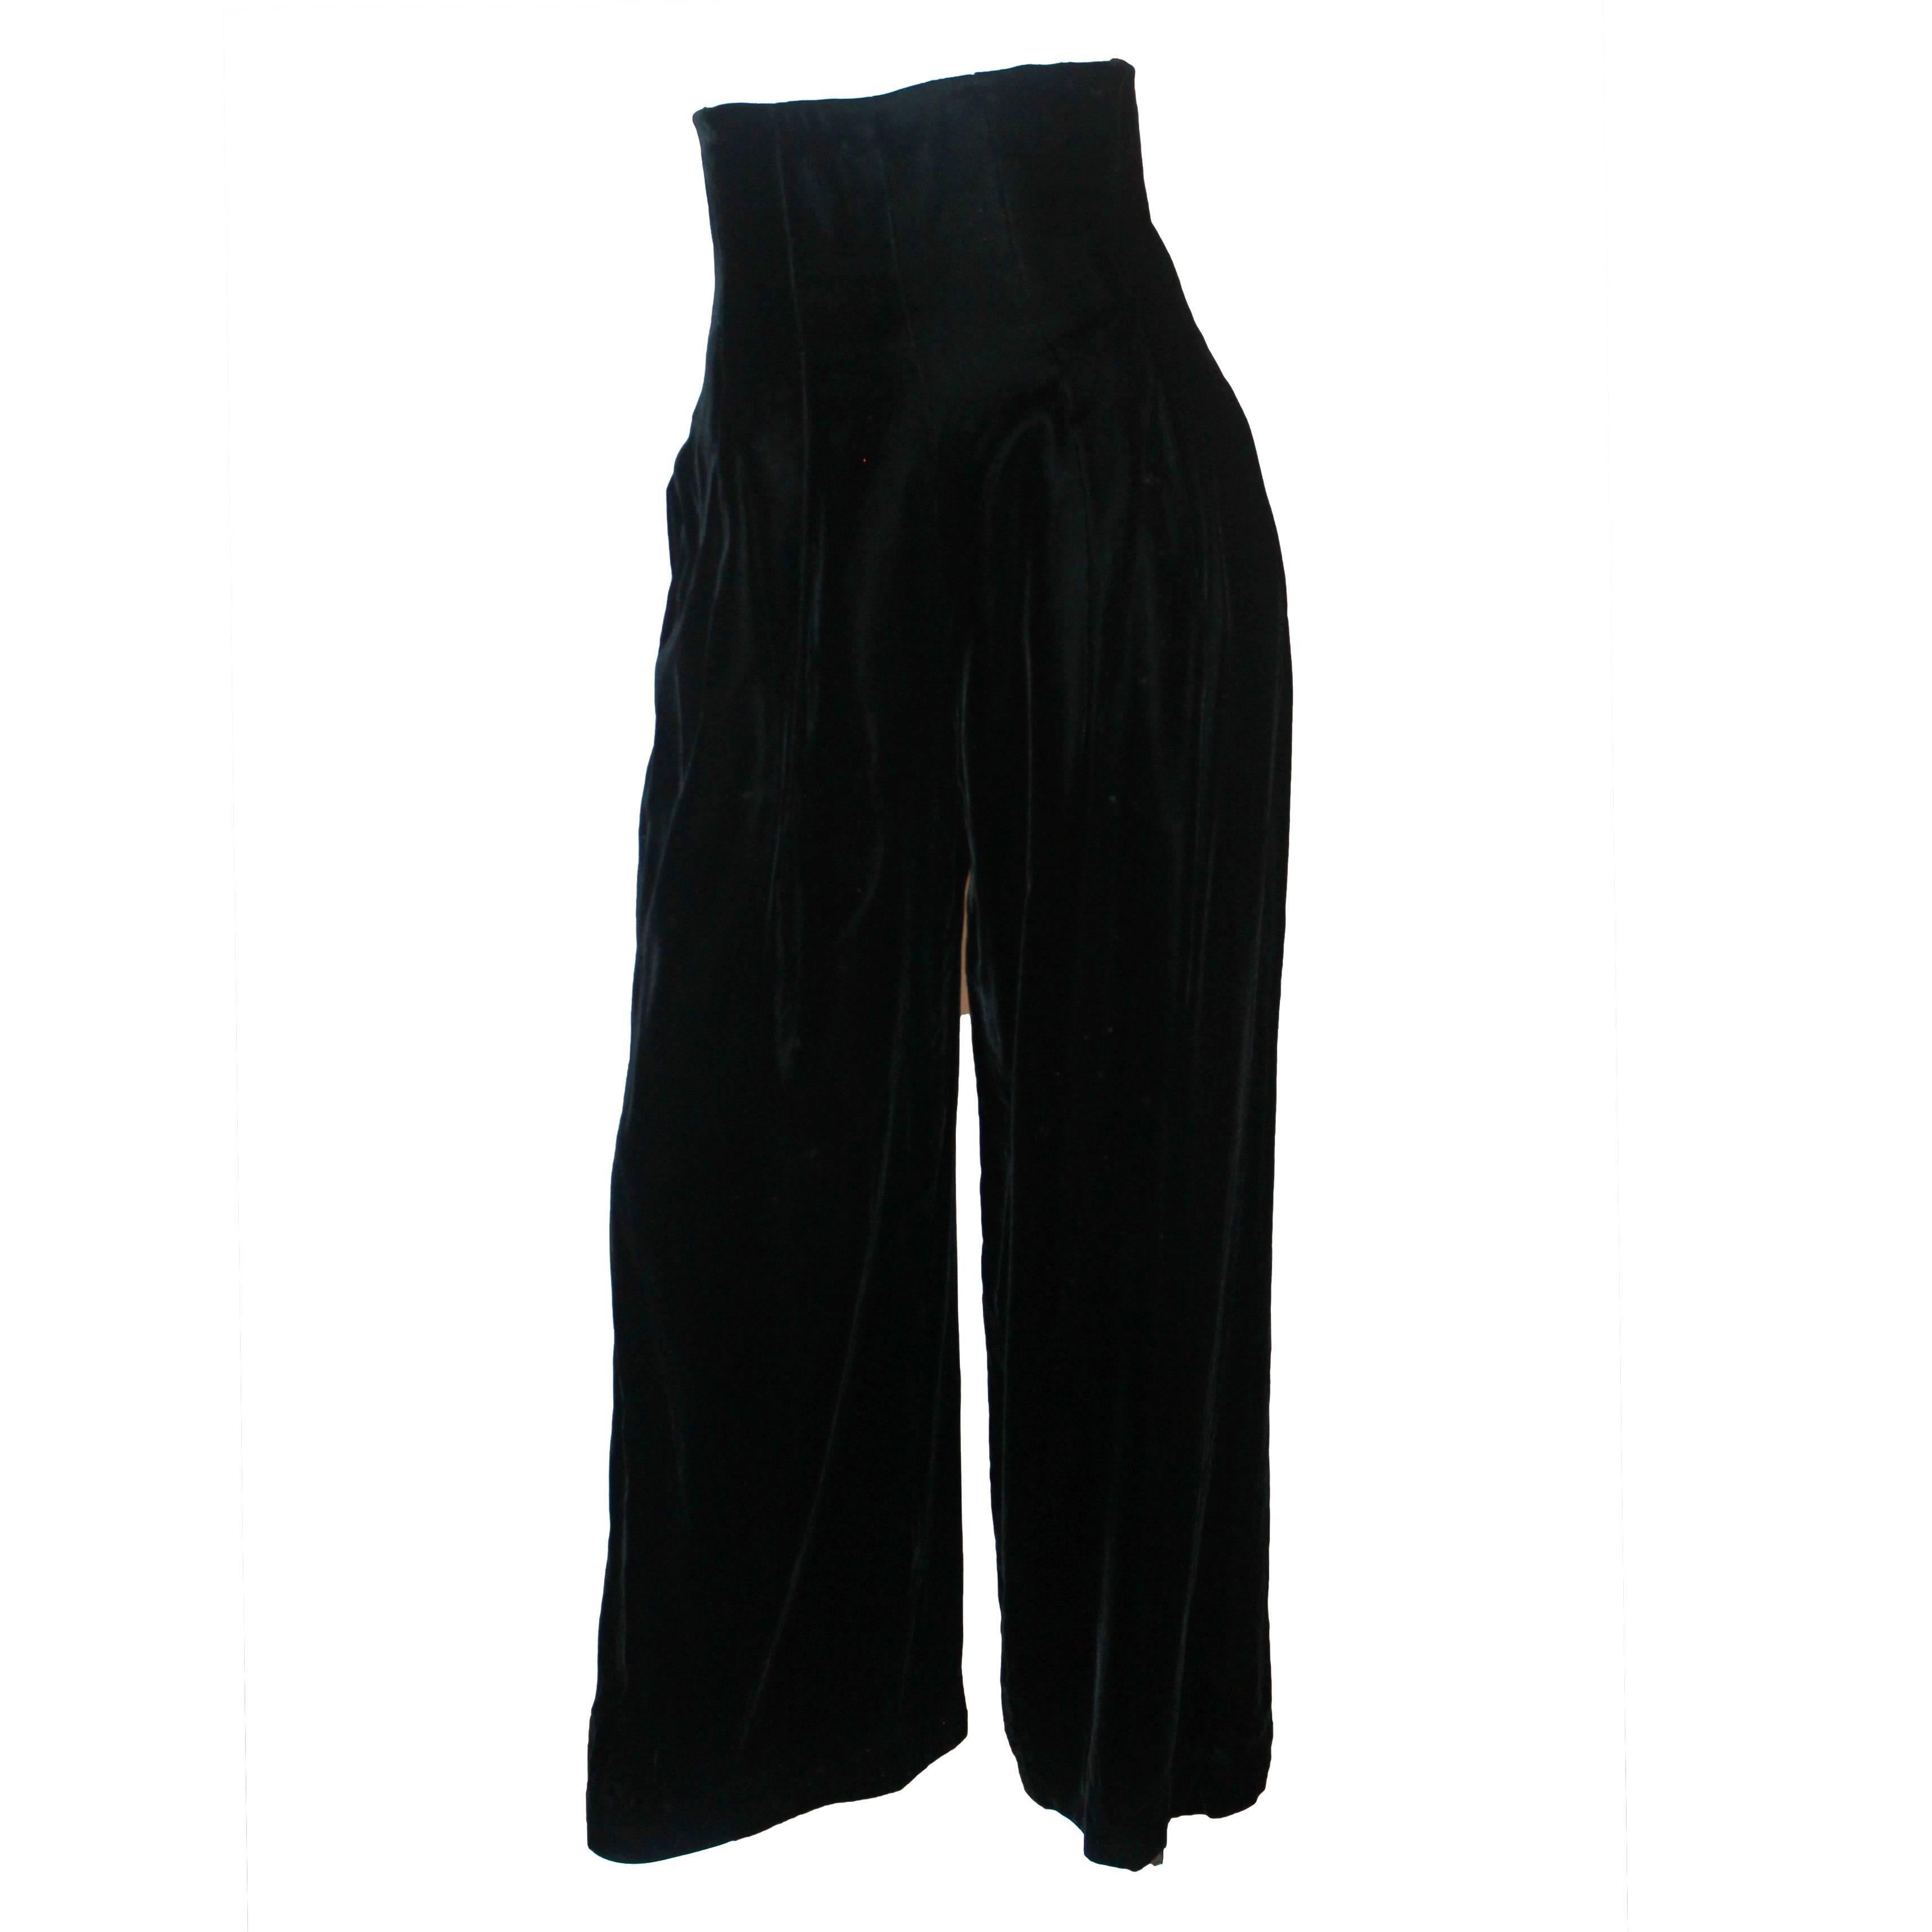 Victor Costa 1970's Vintage Black Velvet High-Waisted Palazzo Pants - 4